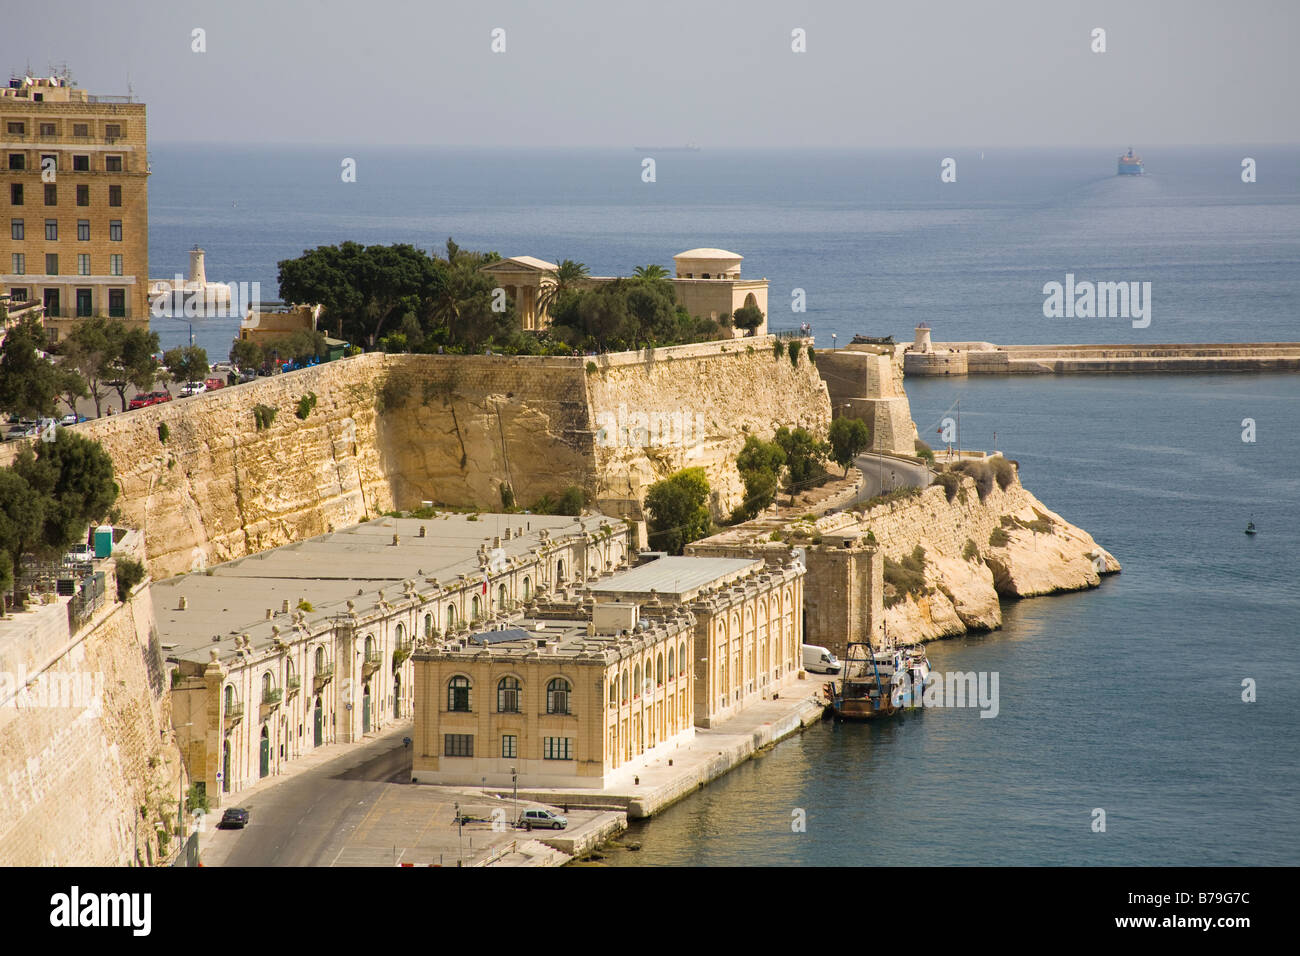 View from Upper Barracca Gardens towards Lower Baracca Gardens and Grand Harbour, Valletta, Malta Stock Photo